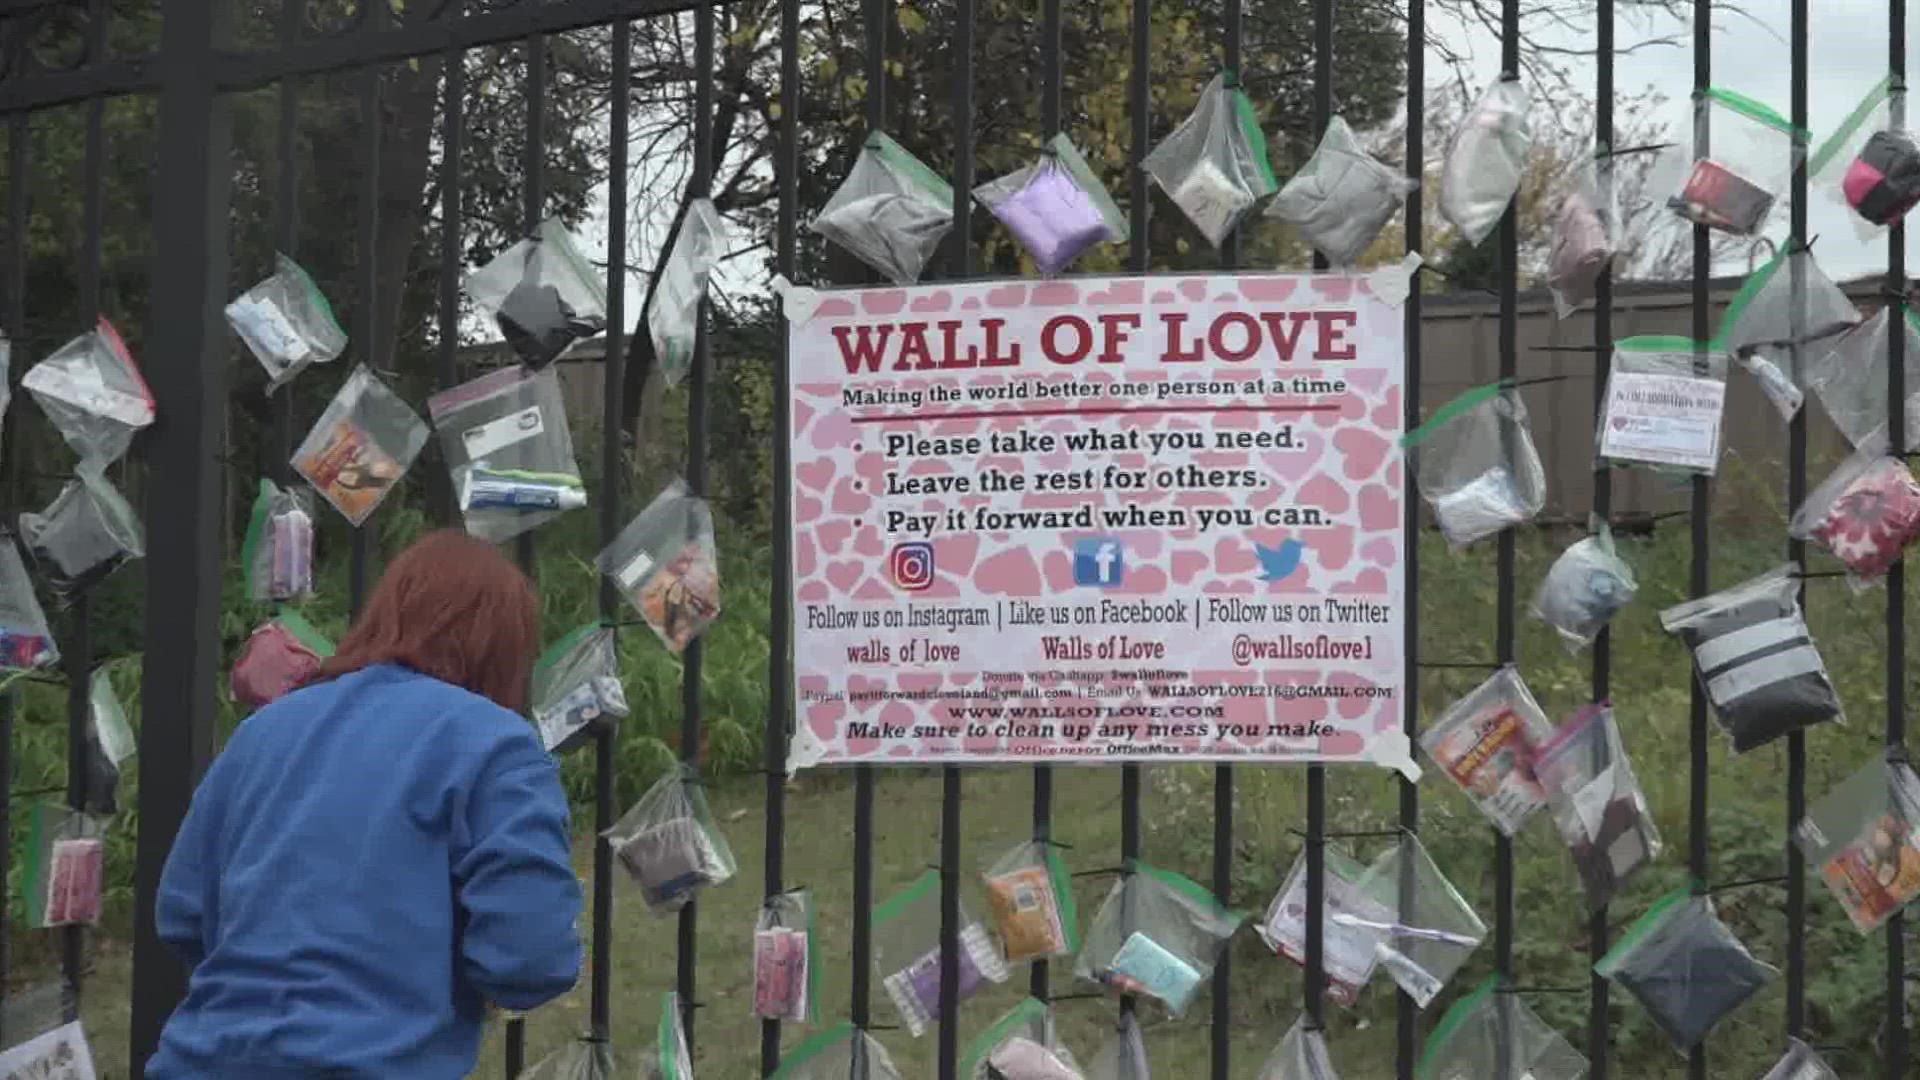 The Wall of Love campaign made its way to south Davie and East Washington Street. It's part of a national effort and UNCG and NC State students made it happen here.